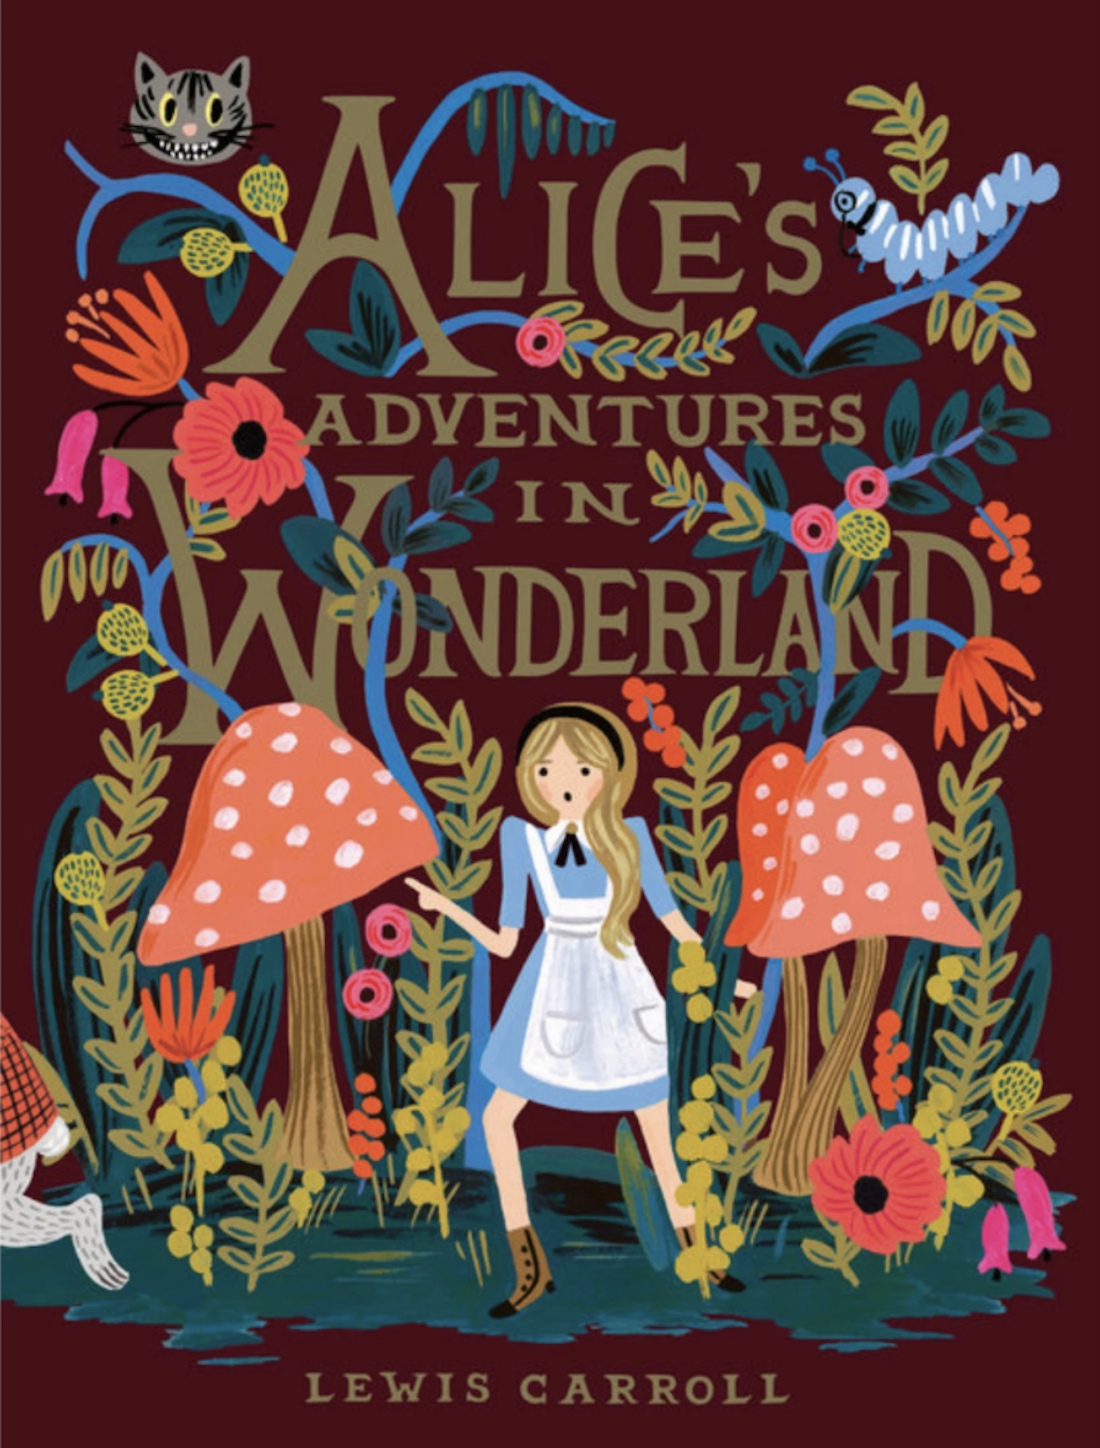 Illustrated cover of Alice's Adventures in Wonderland